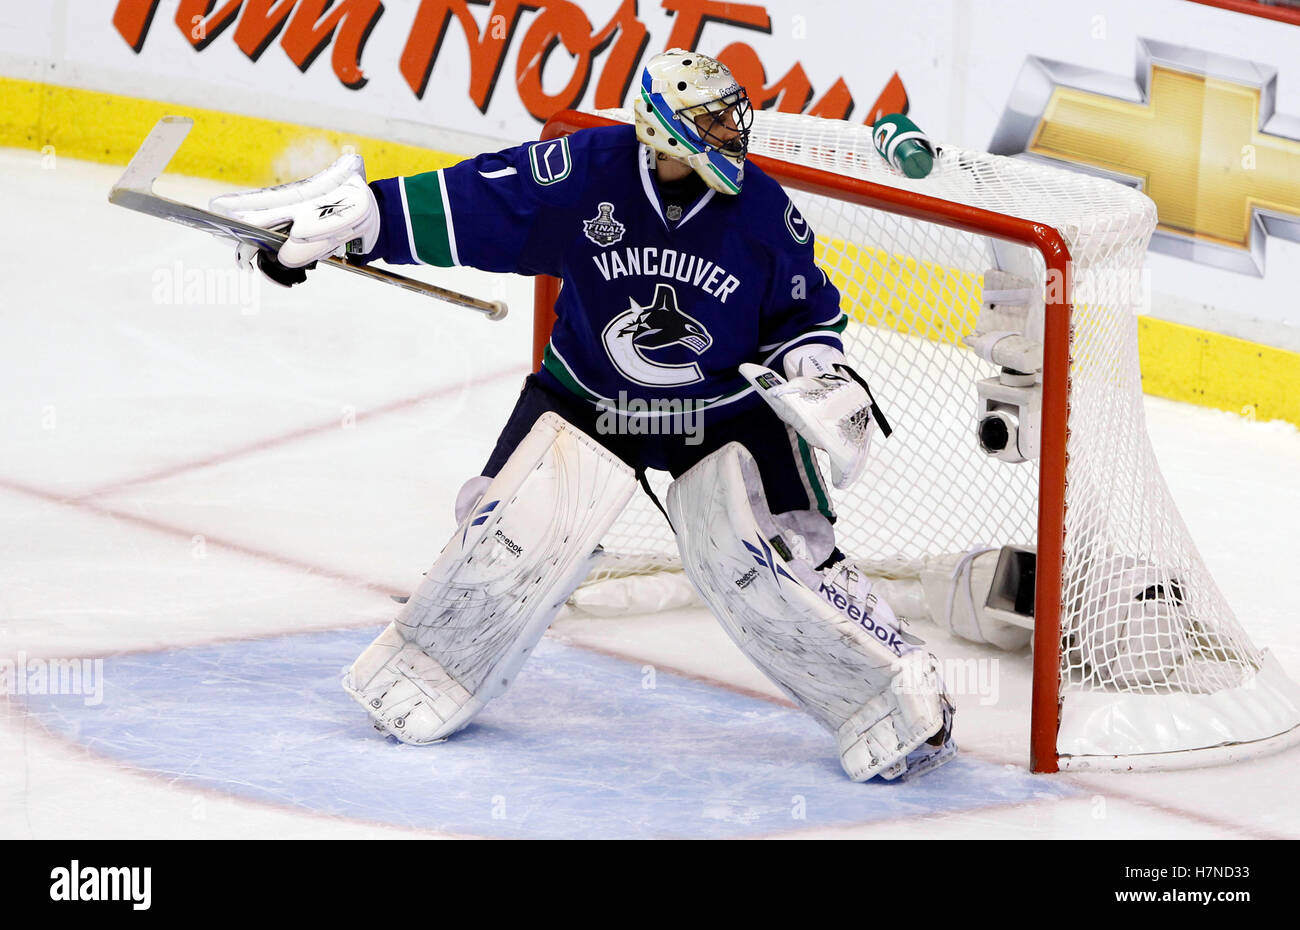 June 4, 2011; Vancouver, BC, CANADA; Vancouver Canucks goalie Roberto Luongo  (1) during game two of